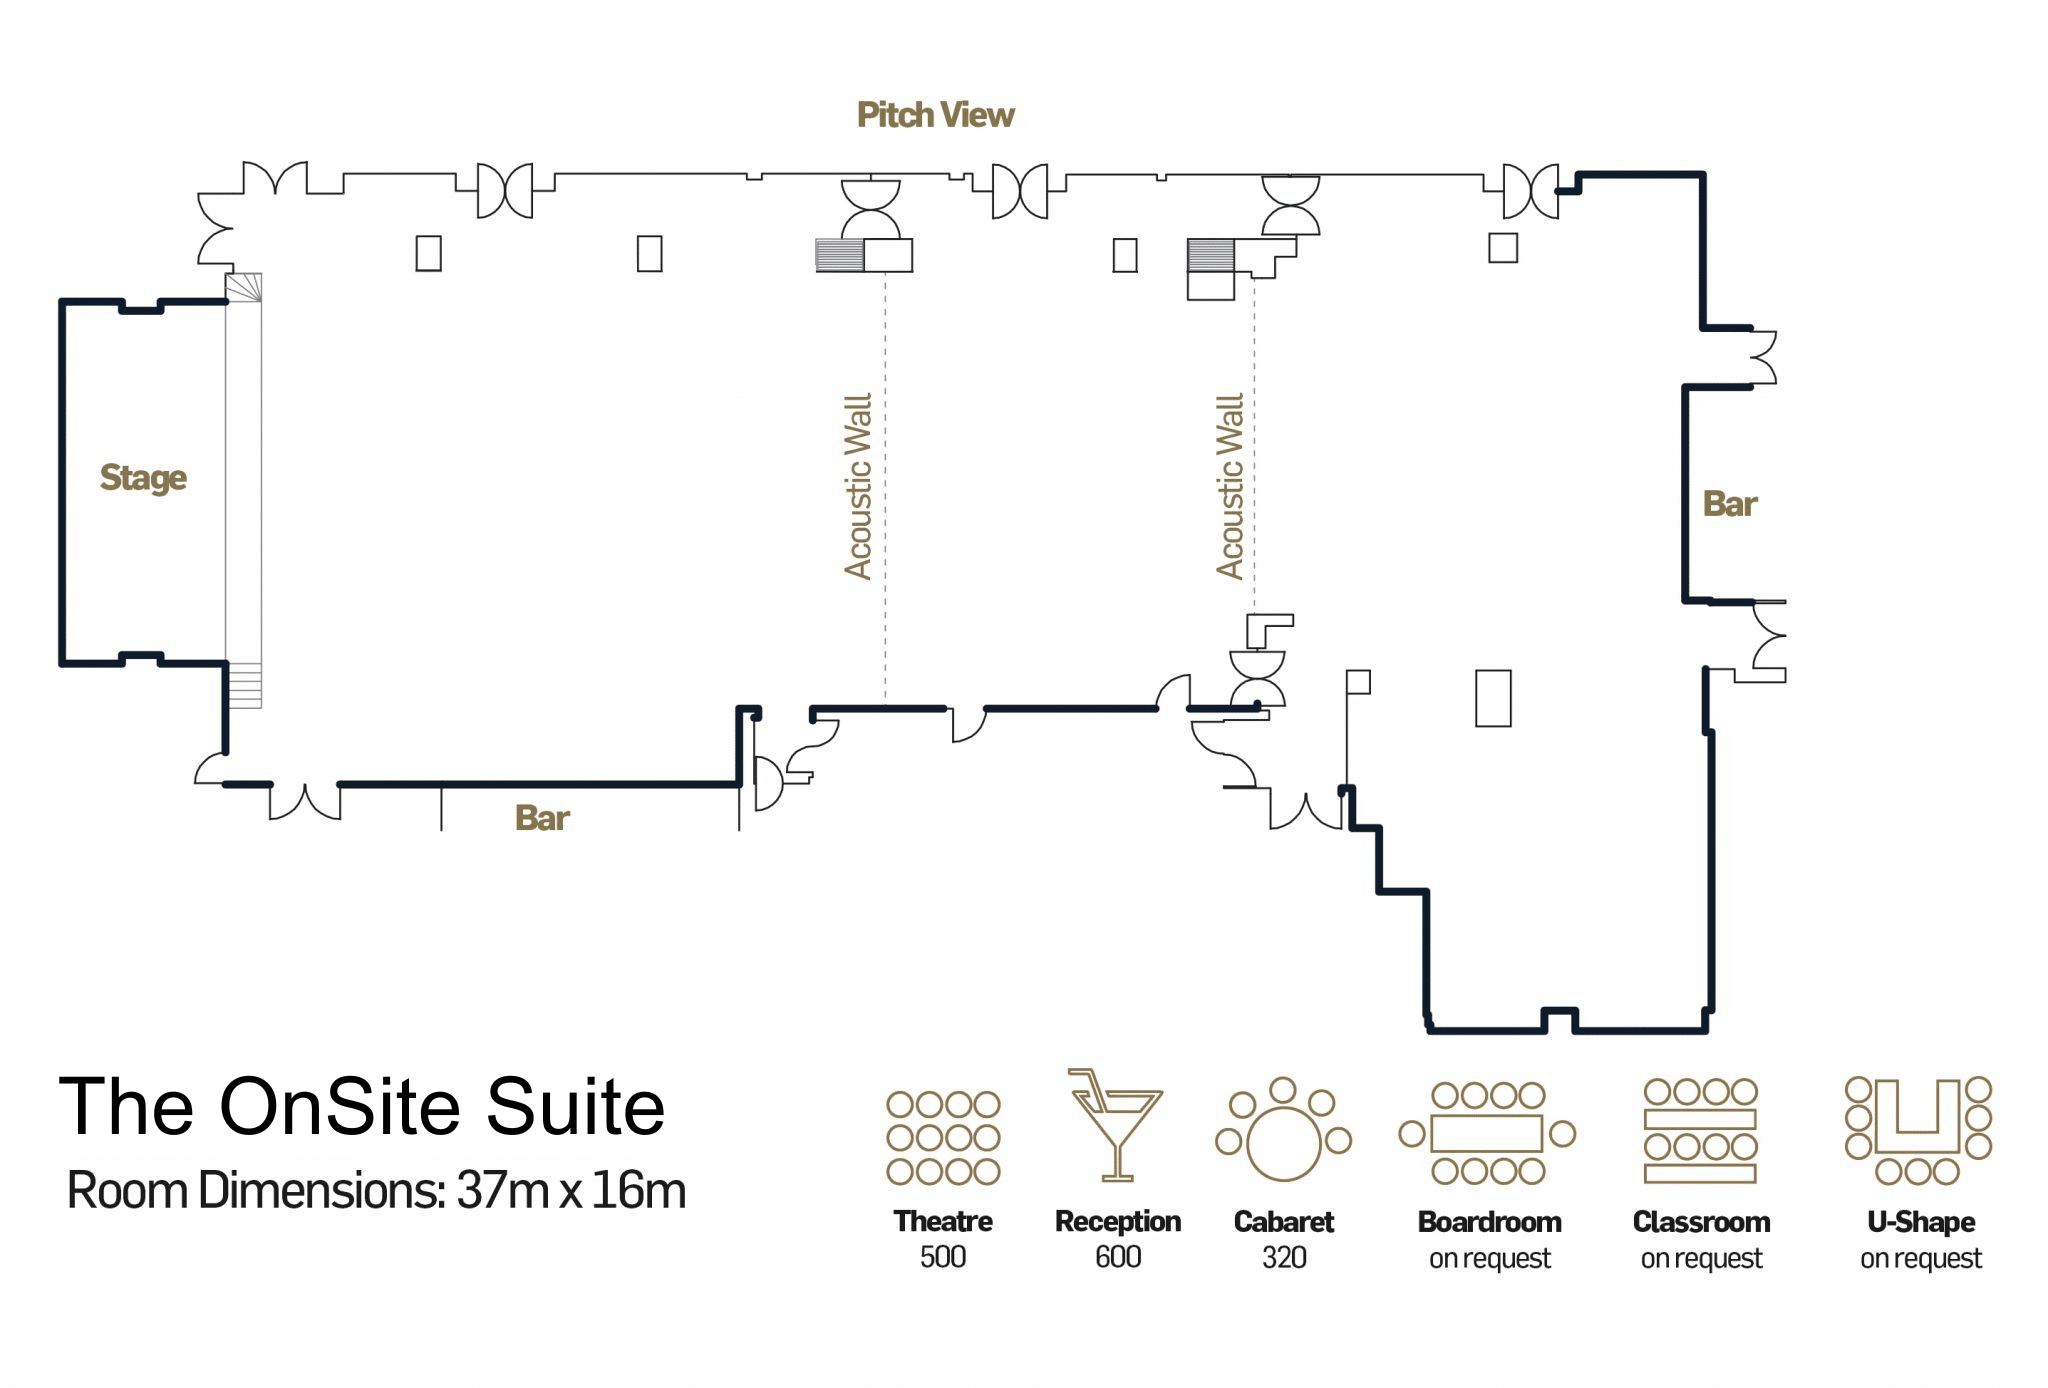 The OnSite Suite